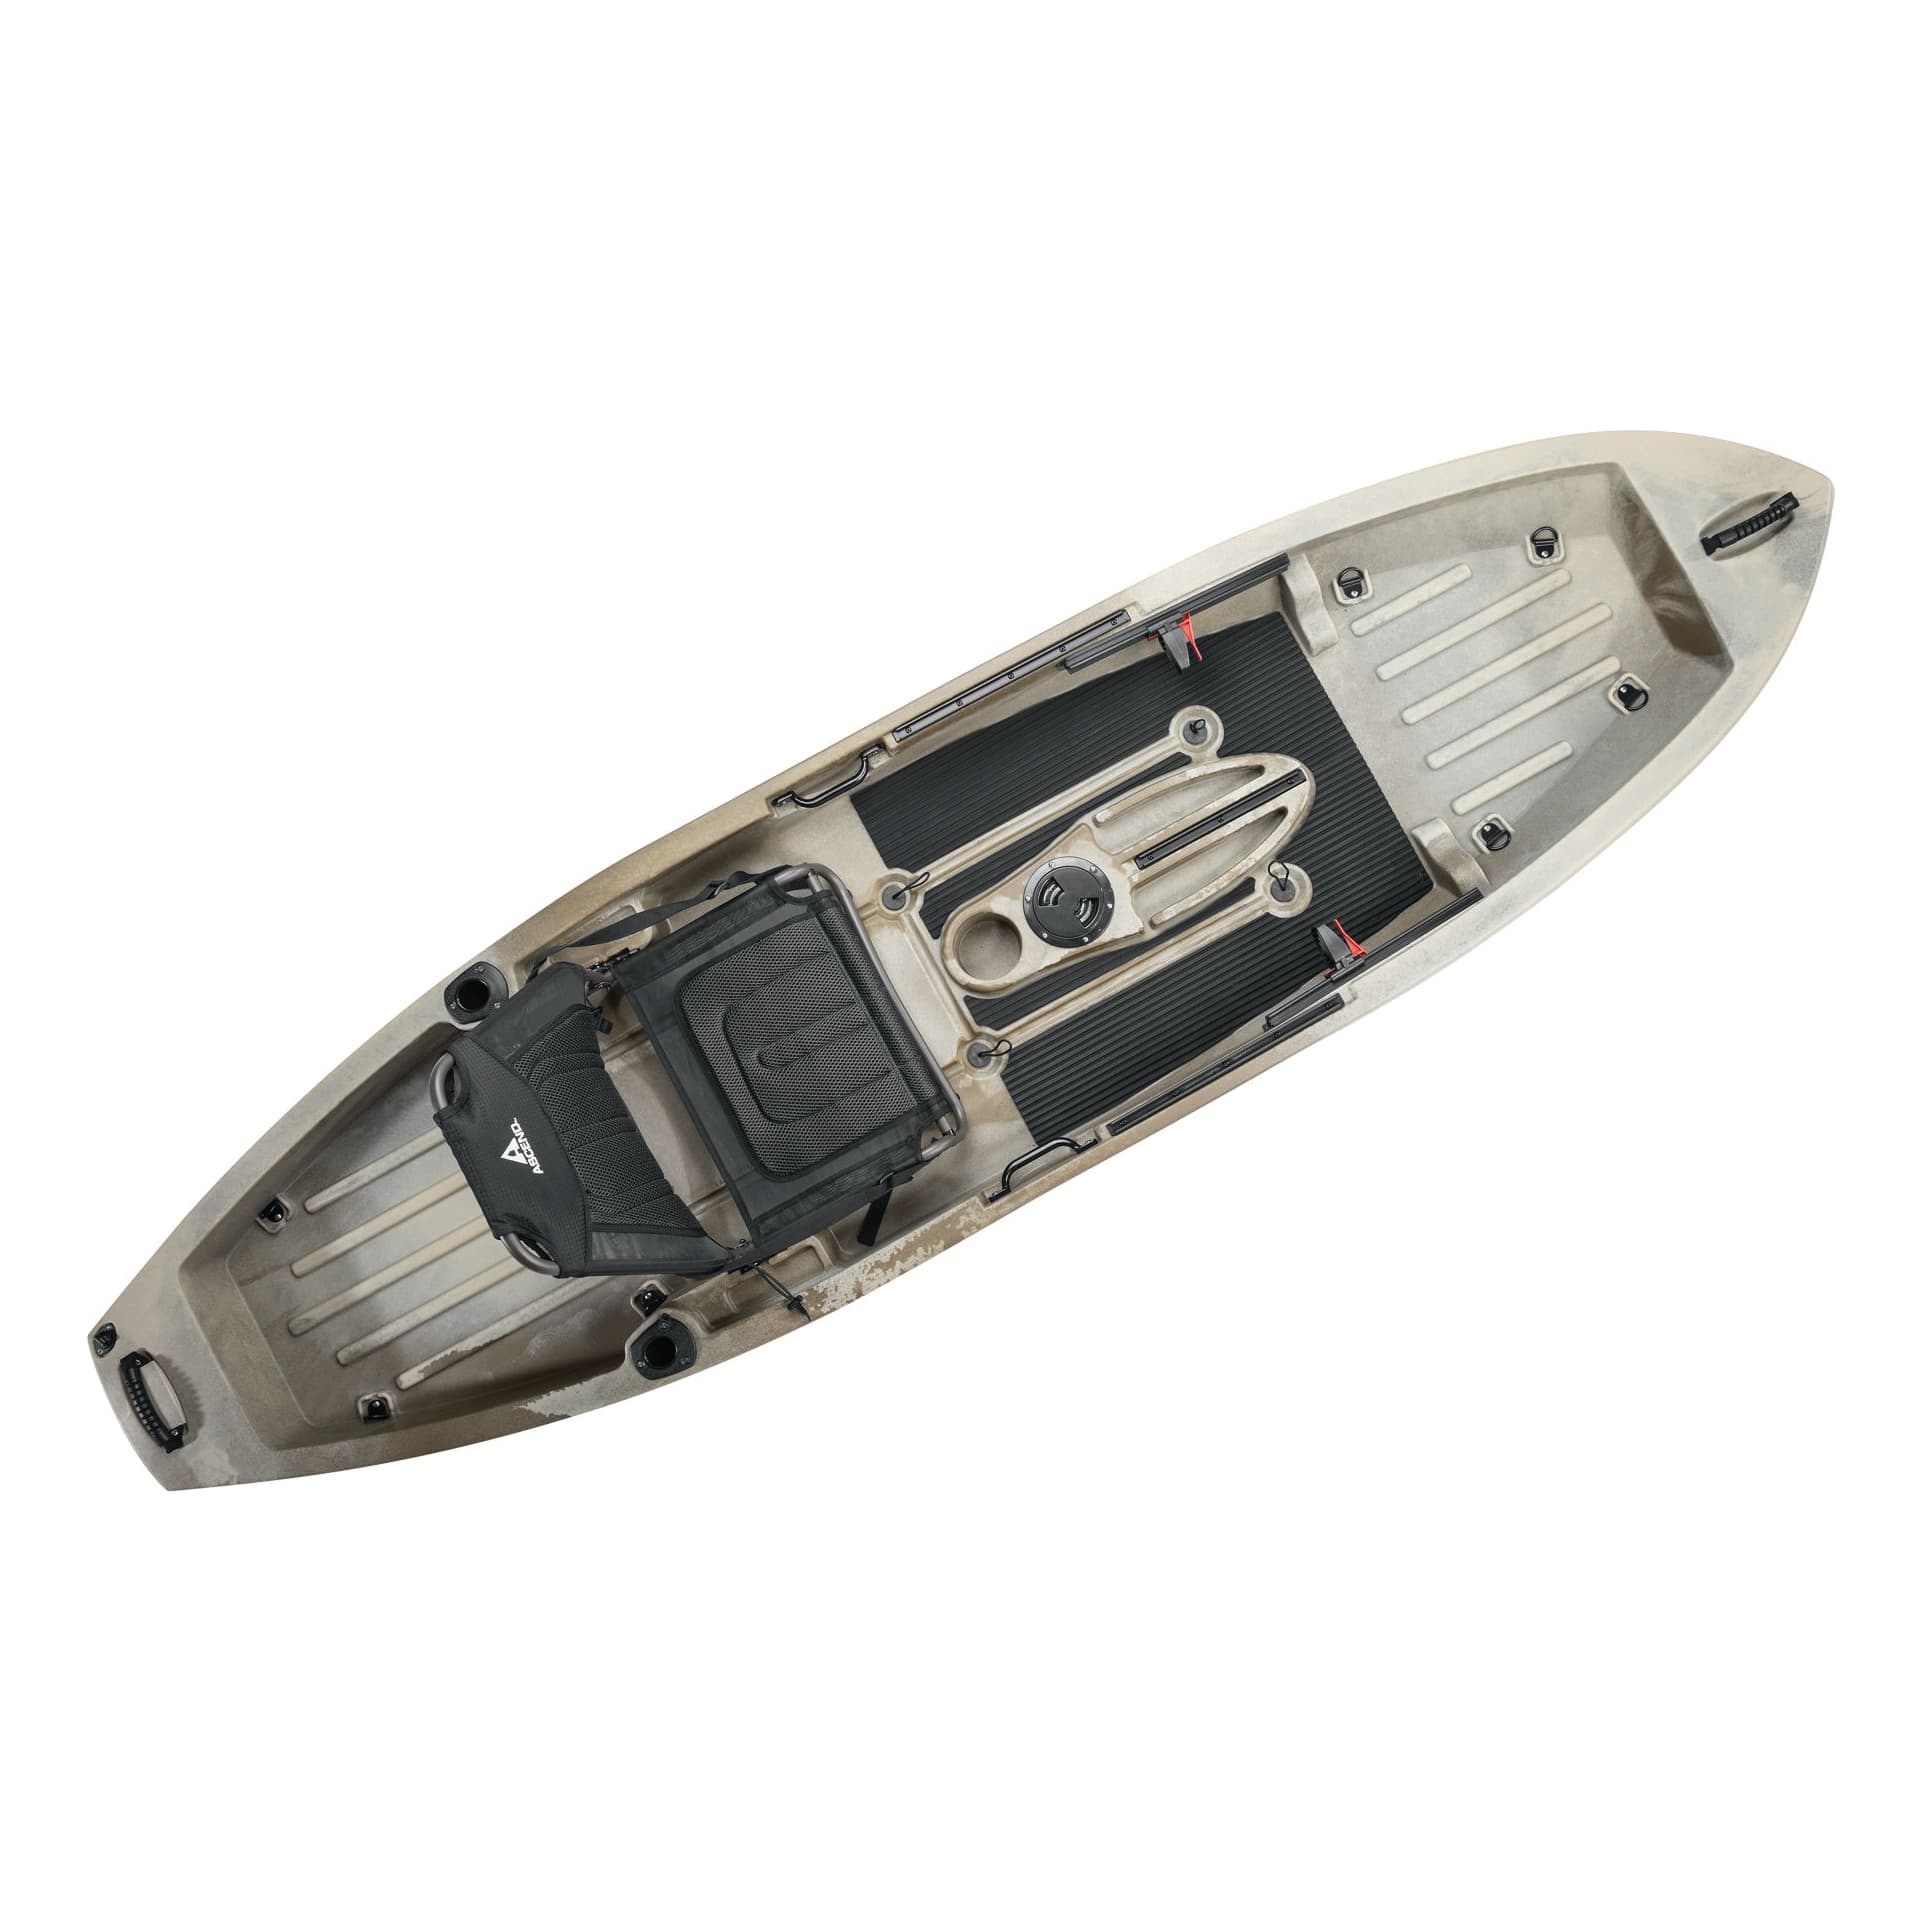 Ascend® 10T Sit-On-Top Kayak with Enhanced Seating System